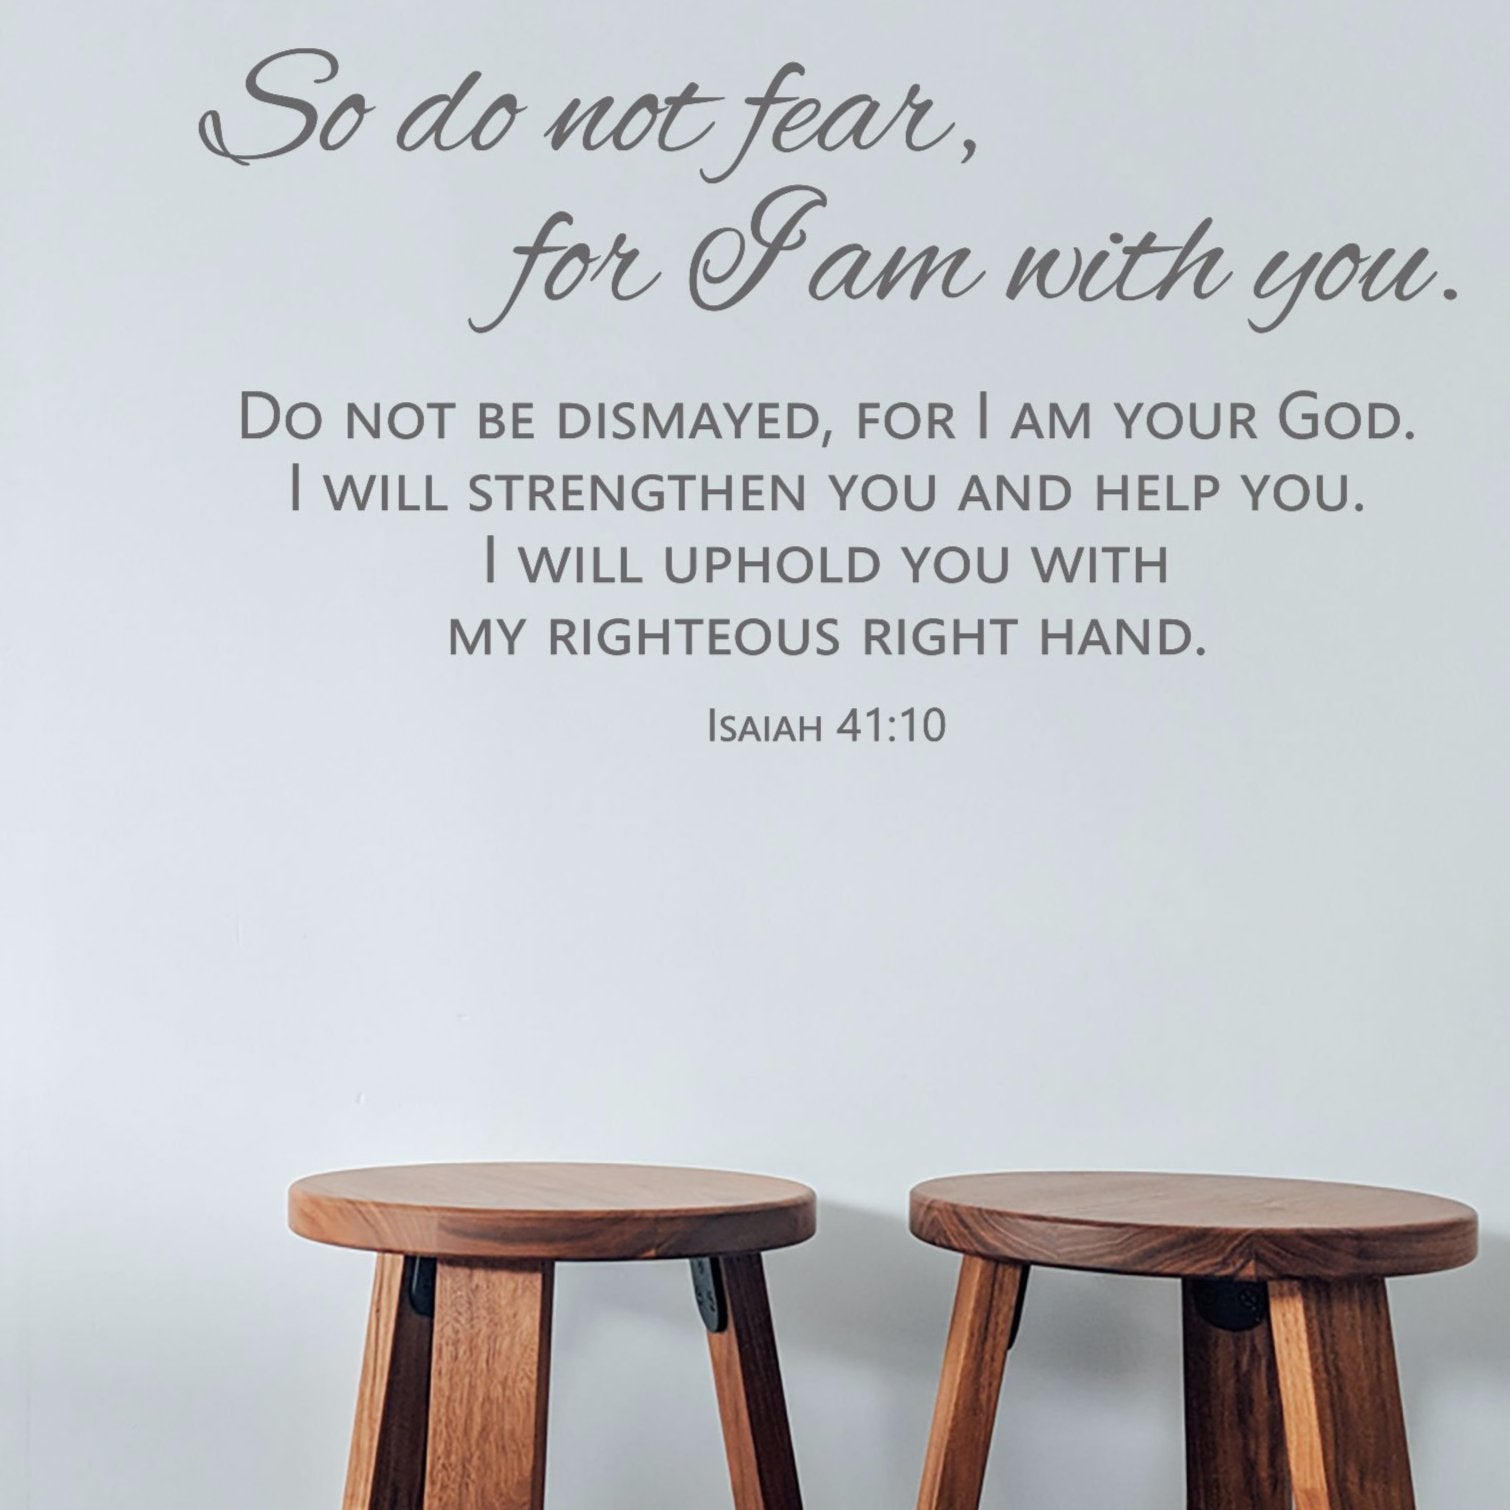 Isaiah 41:10 So do not fear, for I am with you; do not be dismayed